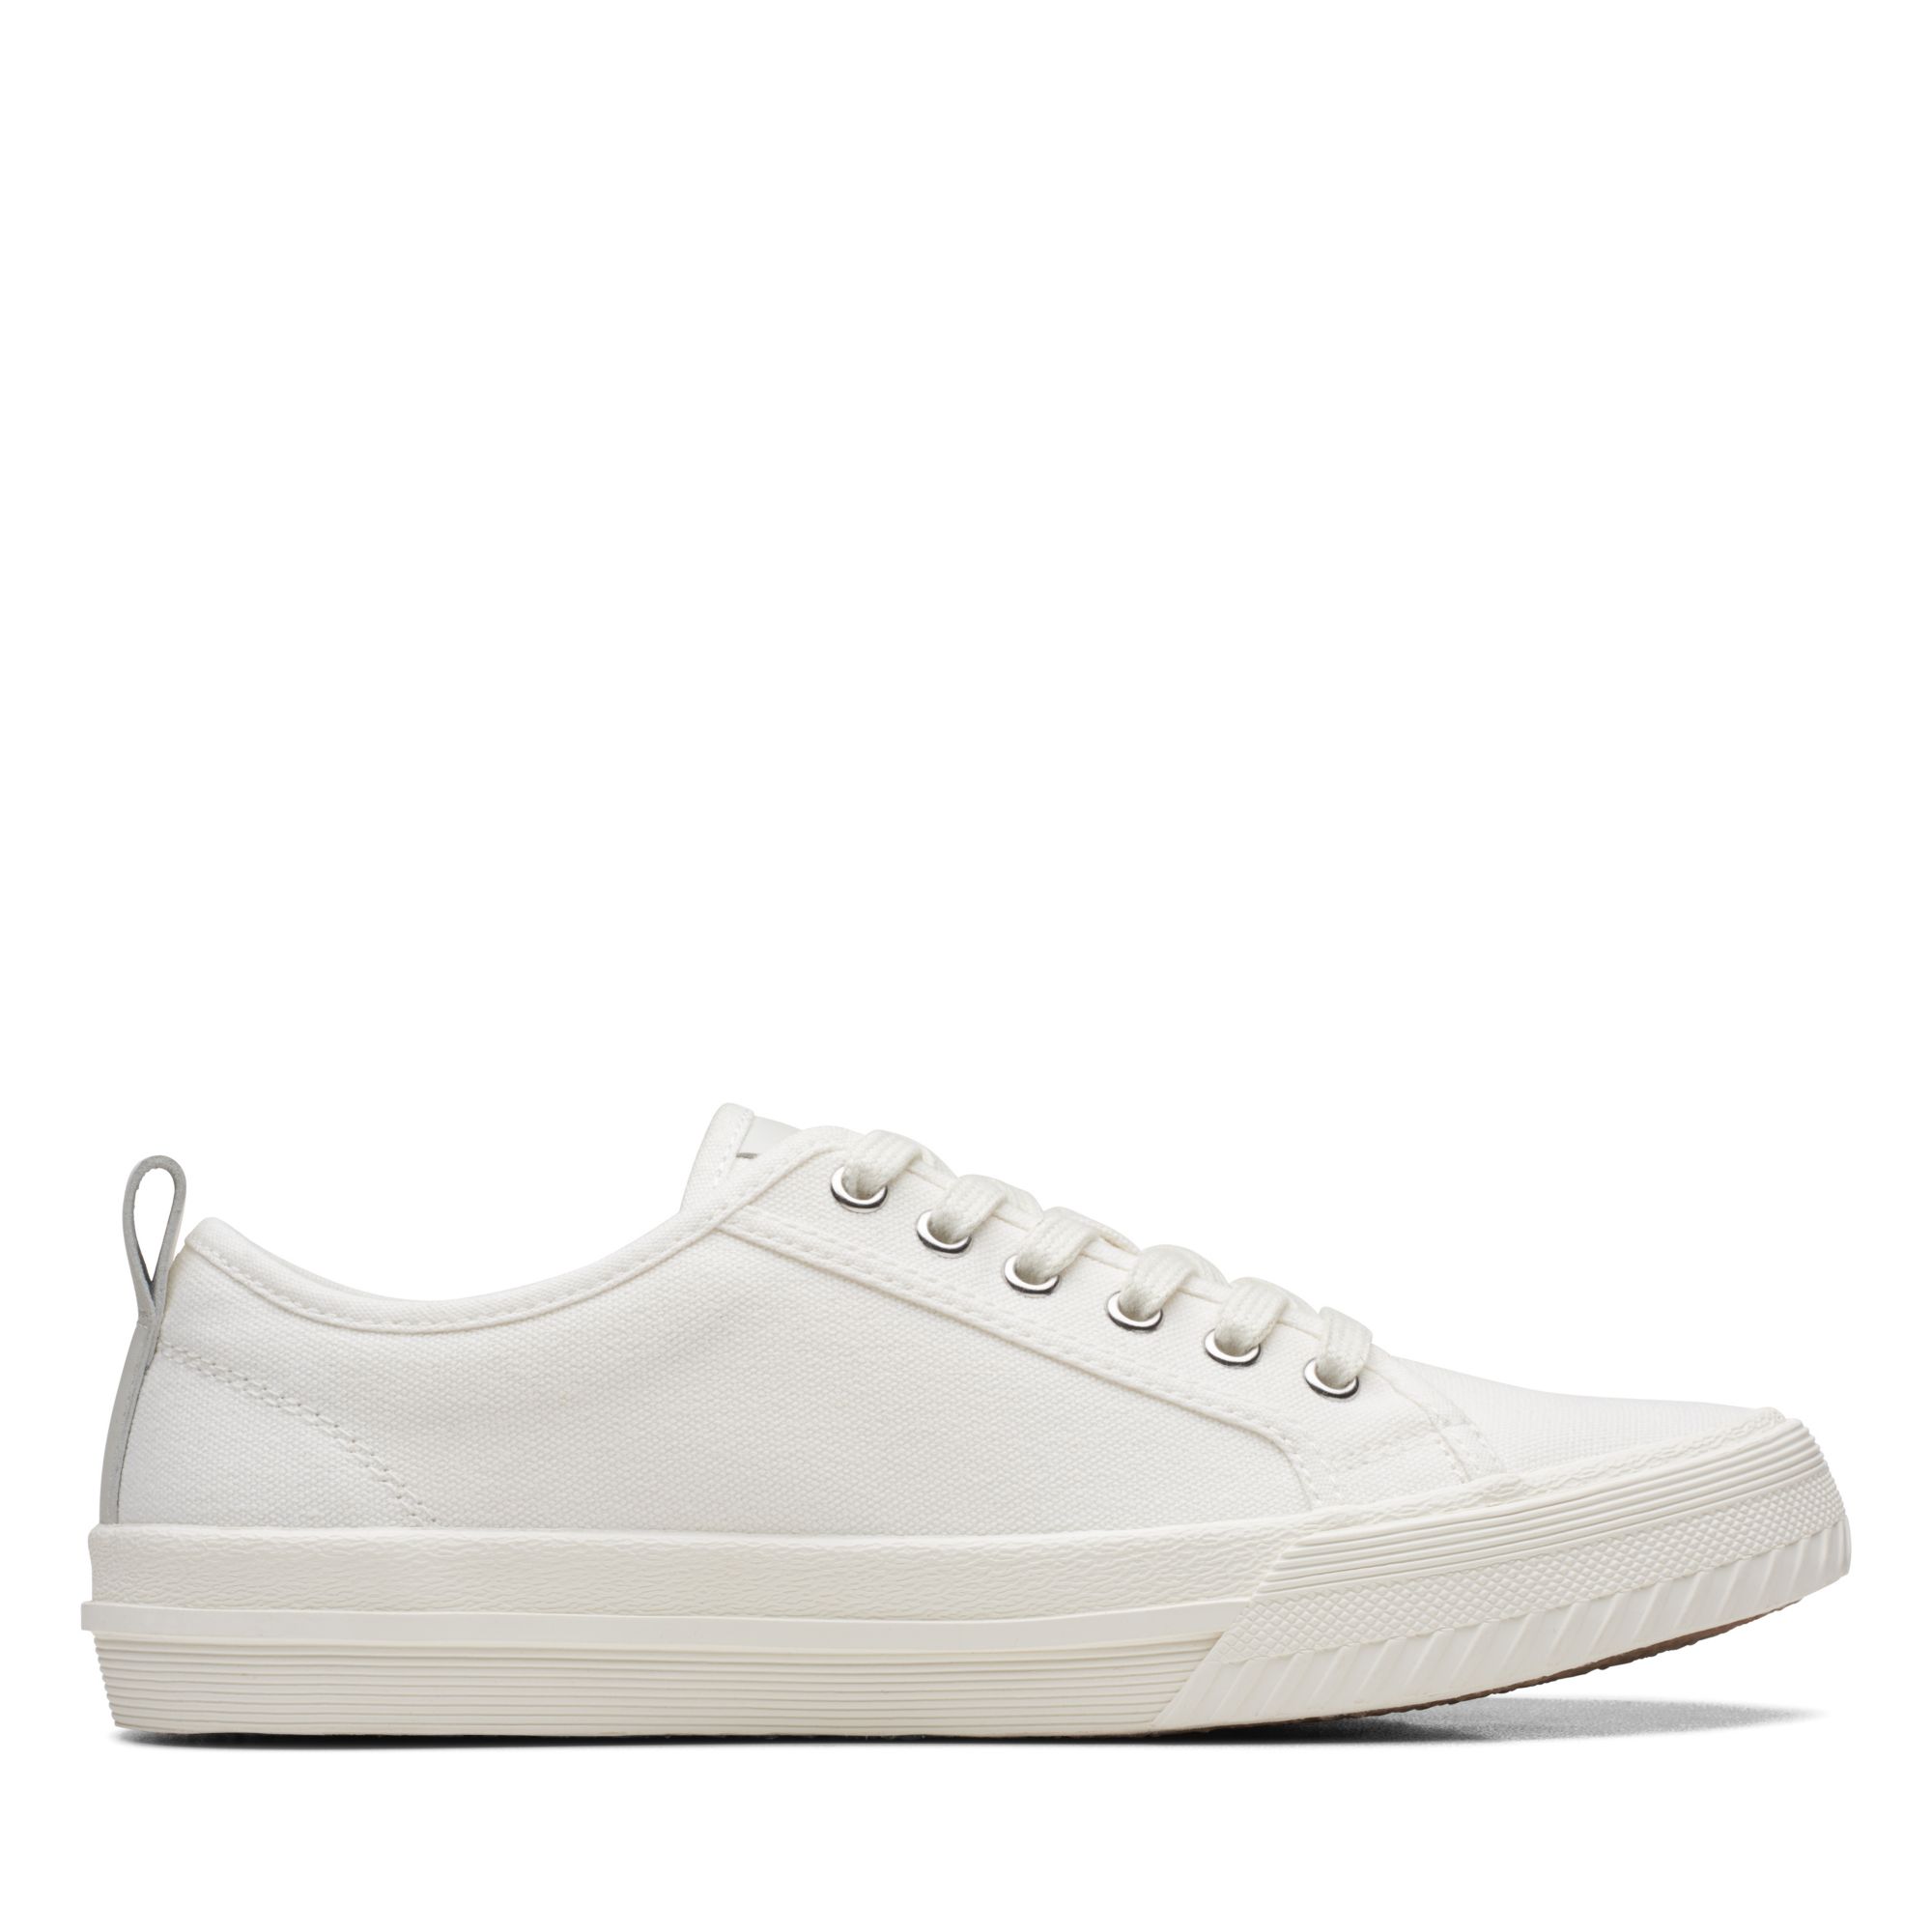 Clarks Roxby Lace White Canvas - Hores Stores